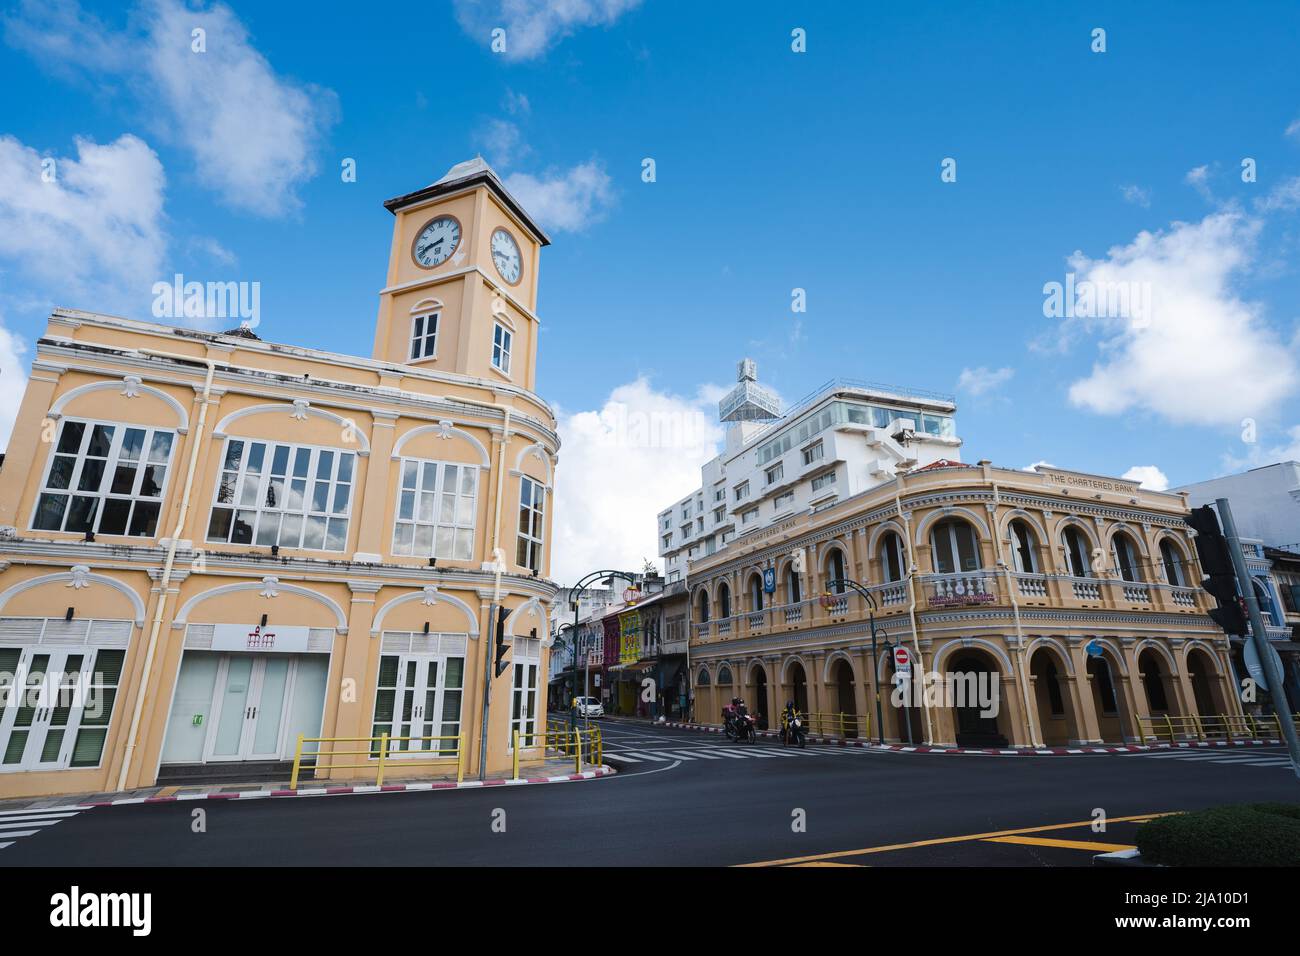 Phuket old town with Building Sino Portuguese architecture at Phuket Old Town area Phuket, Thailand. Stock Photo